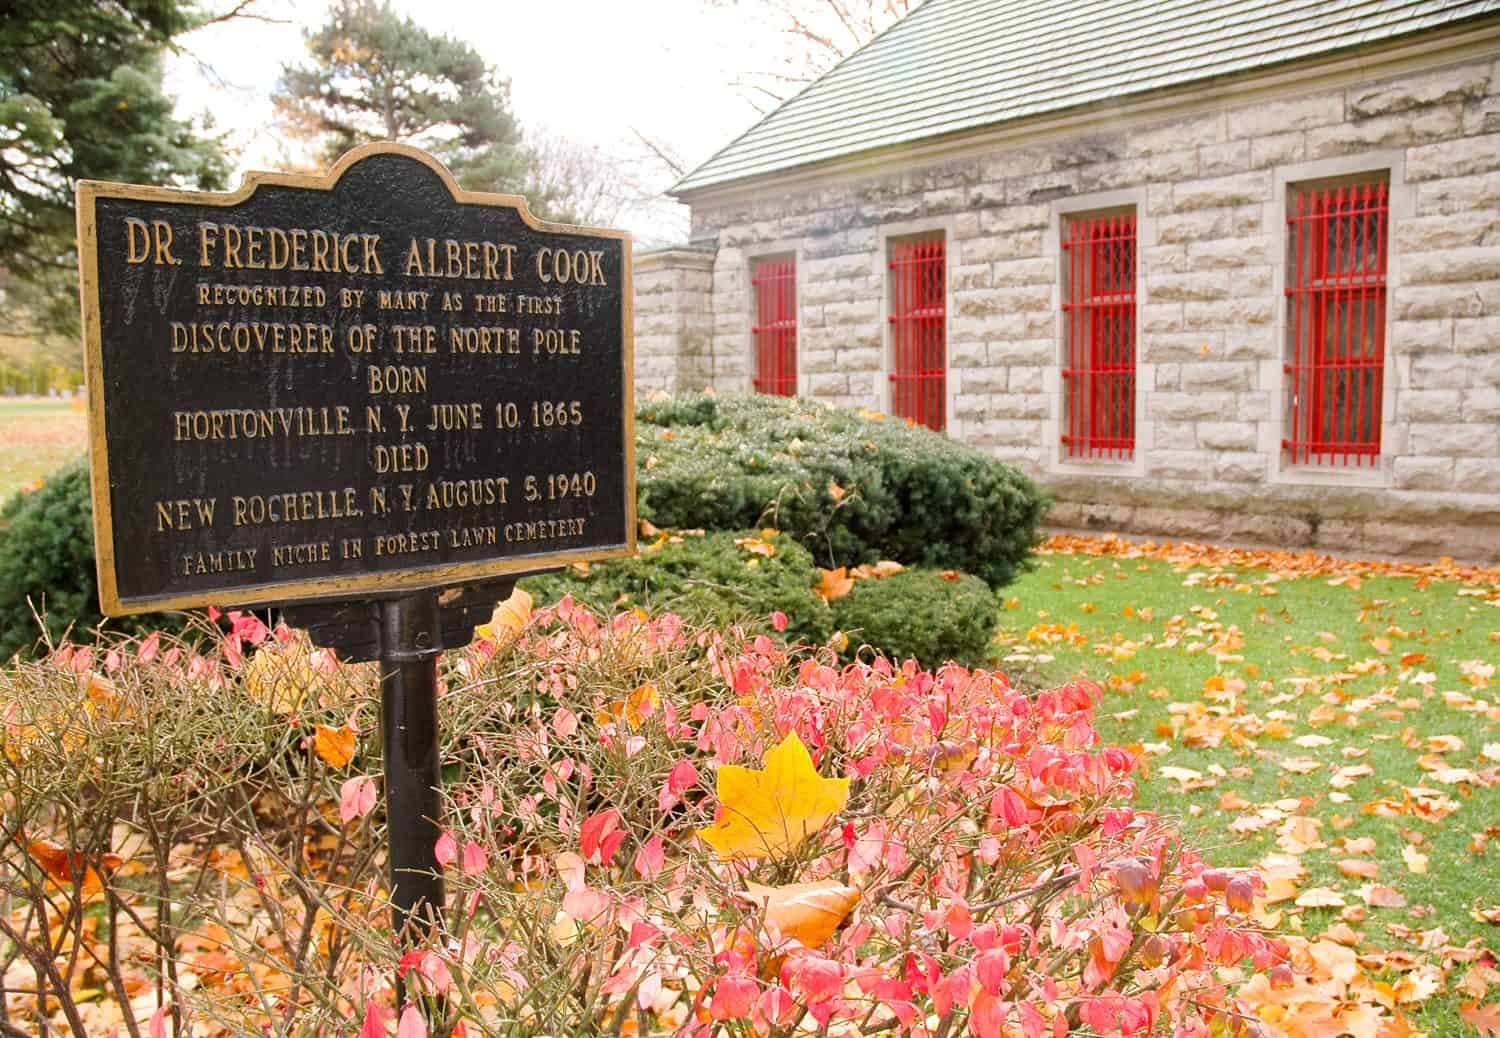 Dr. Frederick Albert Cook marker for the Discoverer of the North Pole at Forest Lawn Cemetery